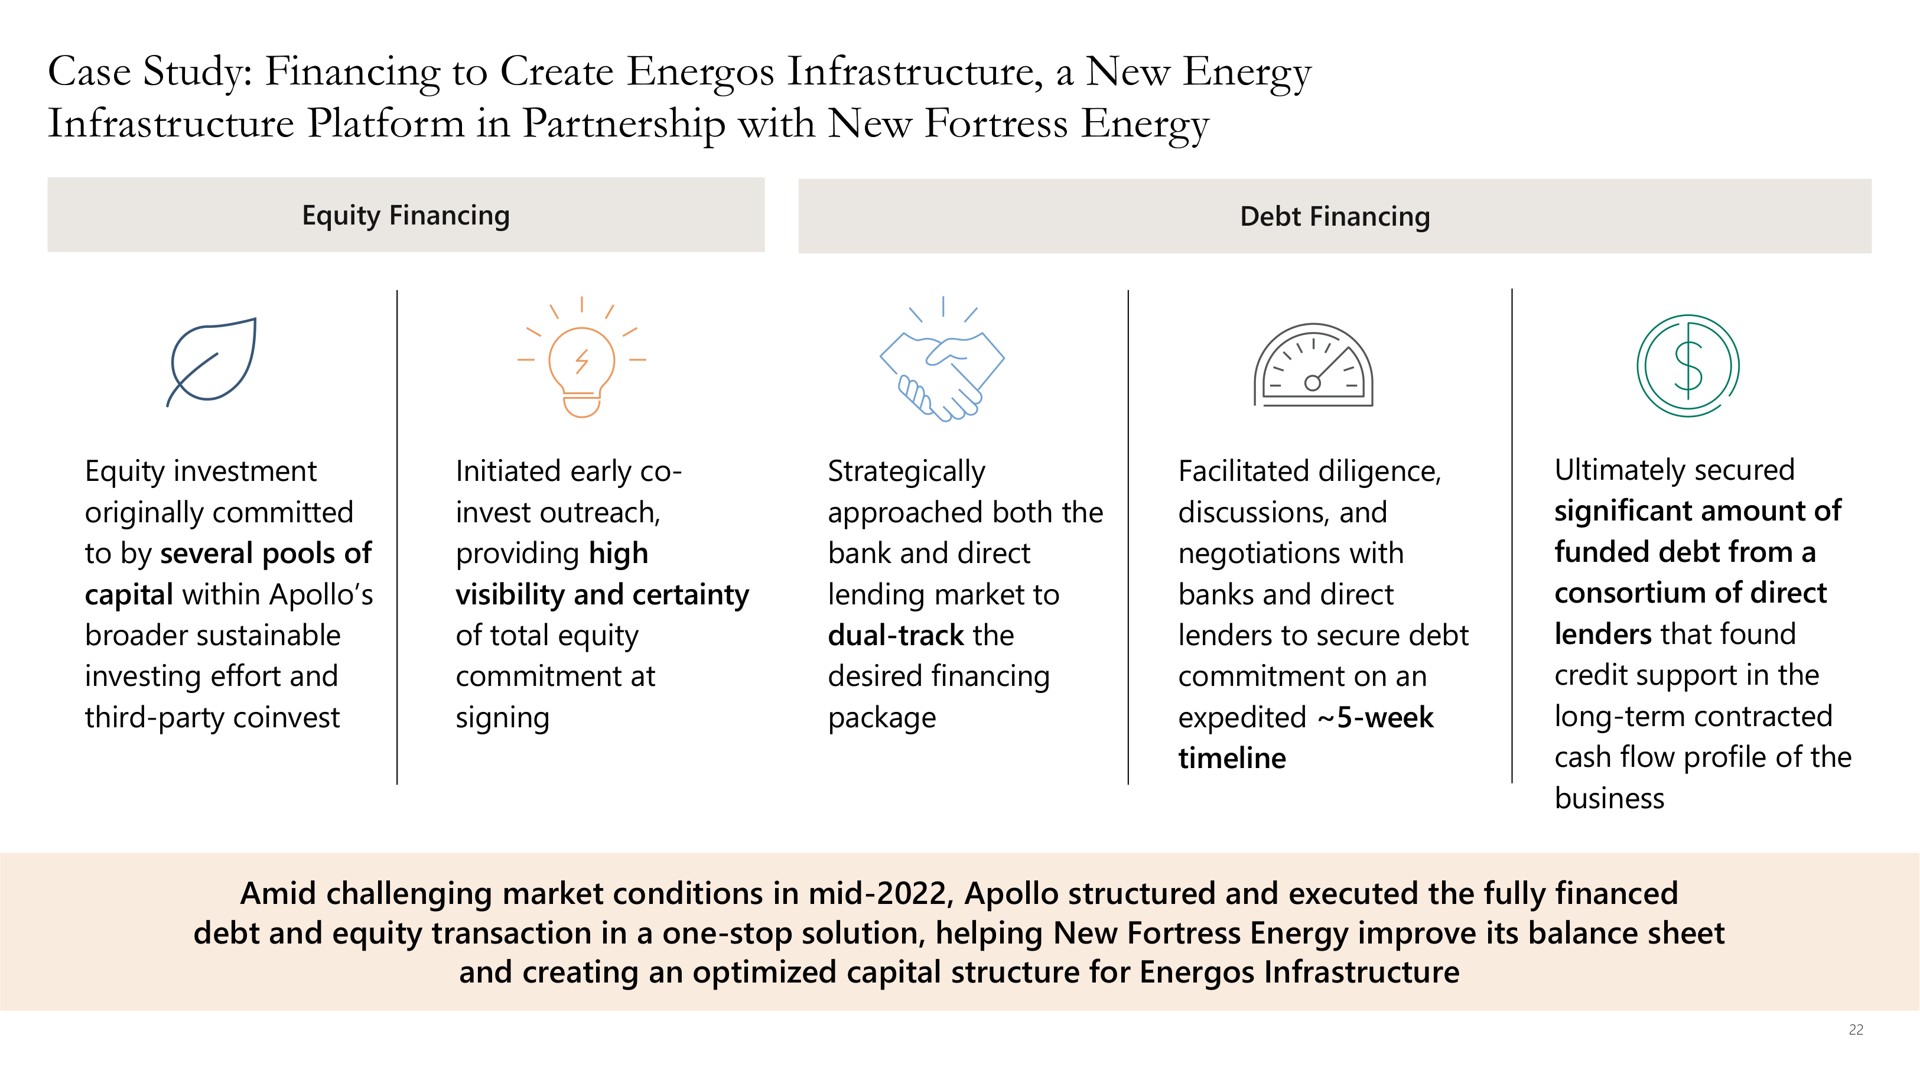 case study financing to create infrastructure a new energy infrastructure platform in partnership with new fortress energy | Apollo Global Management